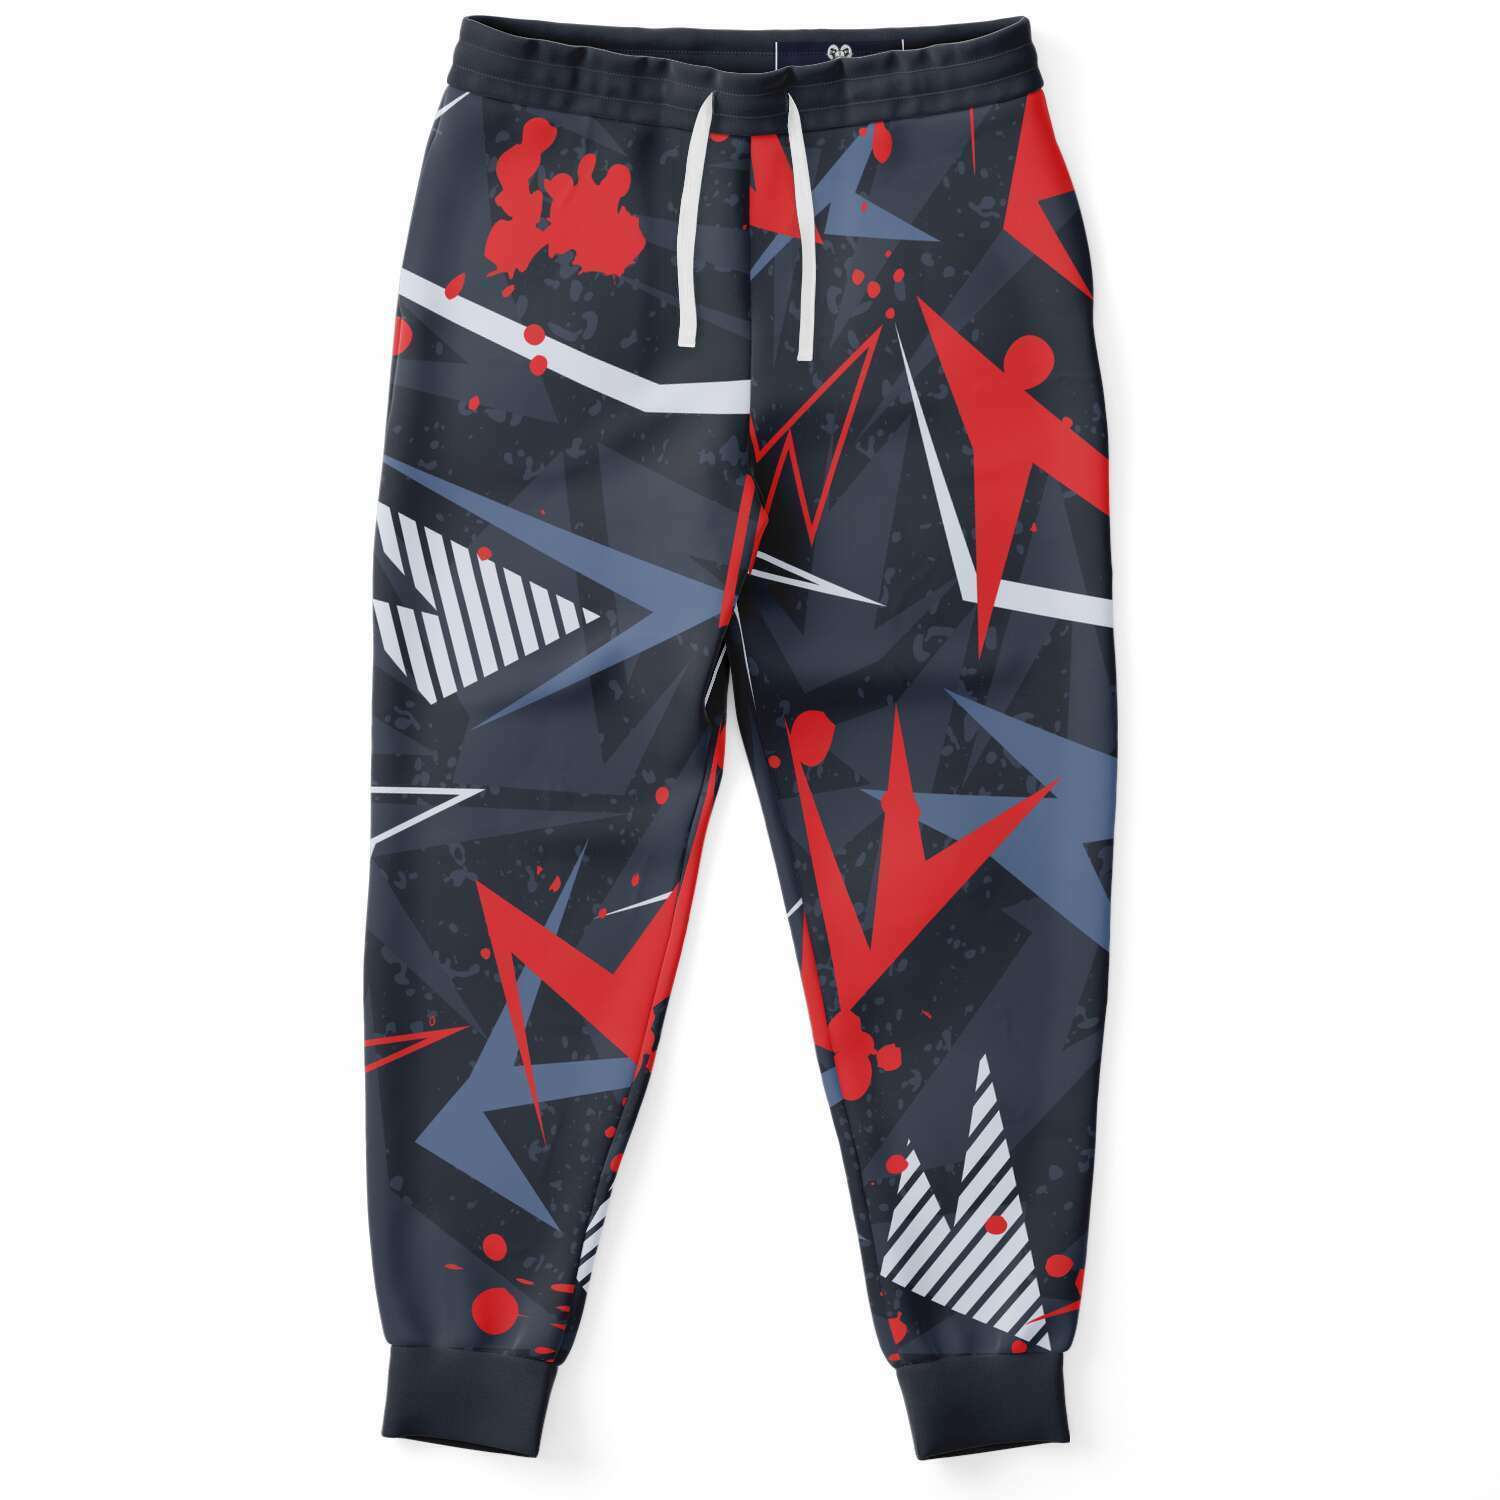 Red Geometric Abstract Shapes Unisex Fleece Fashion Joggers - kayzers